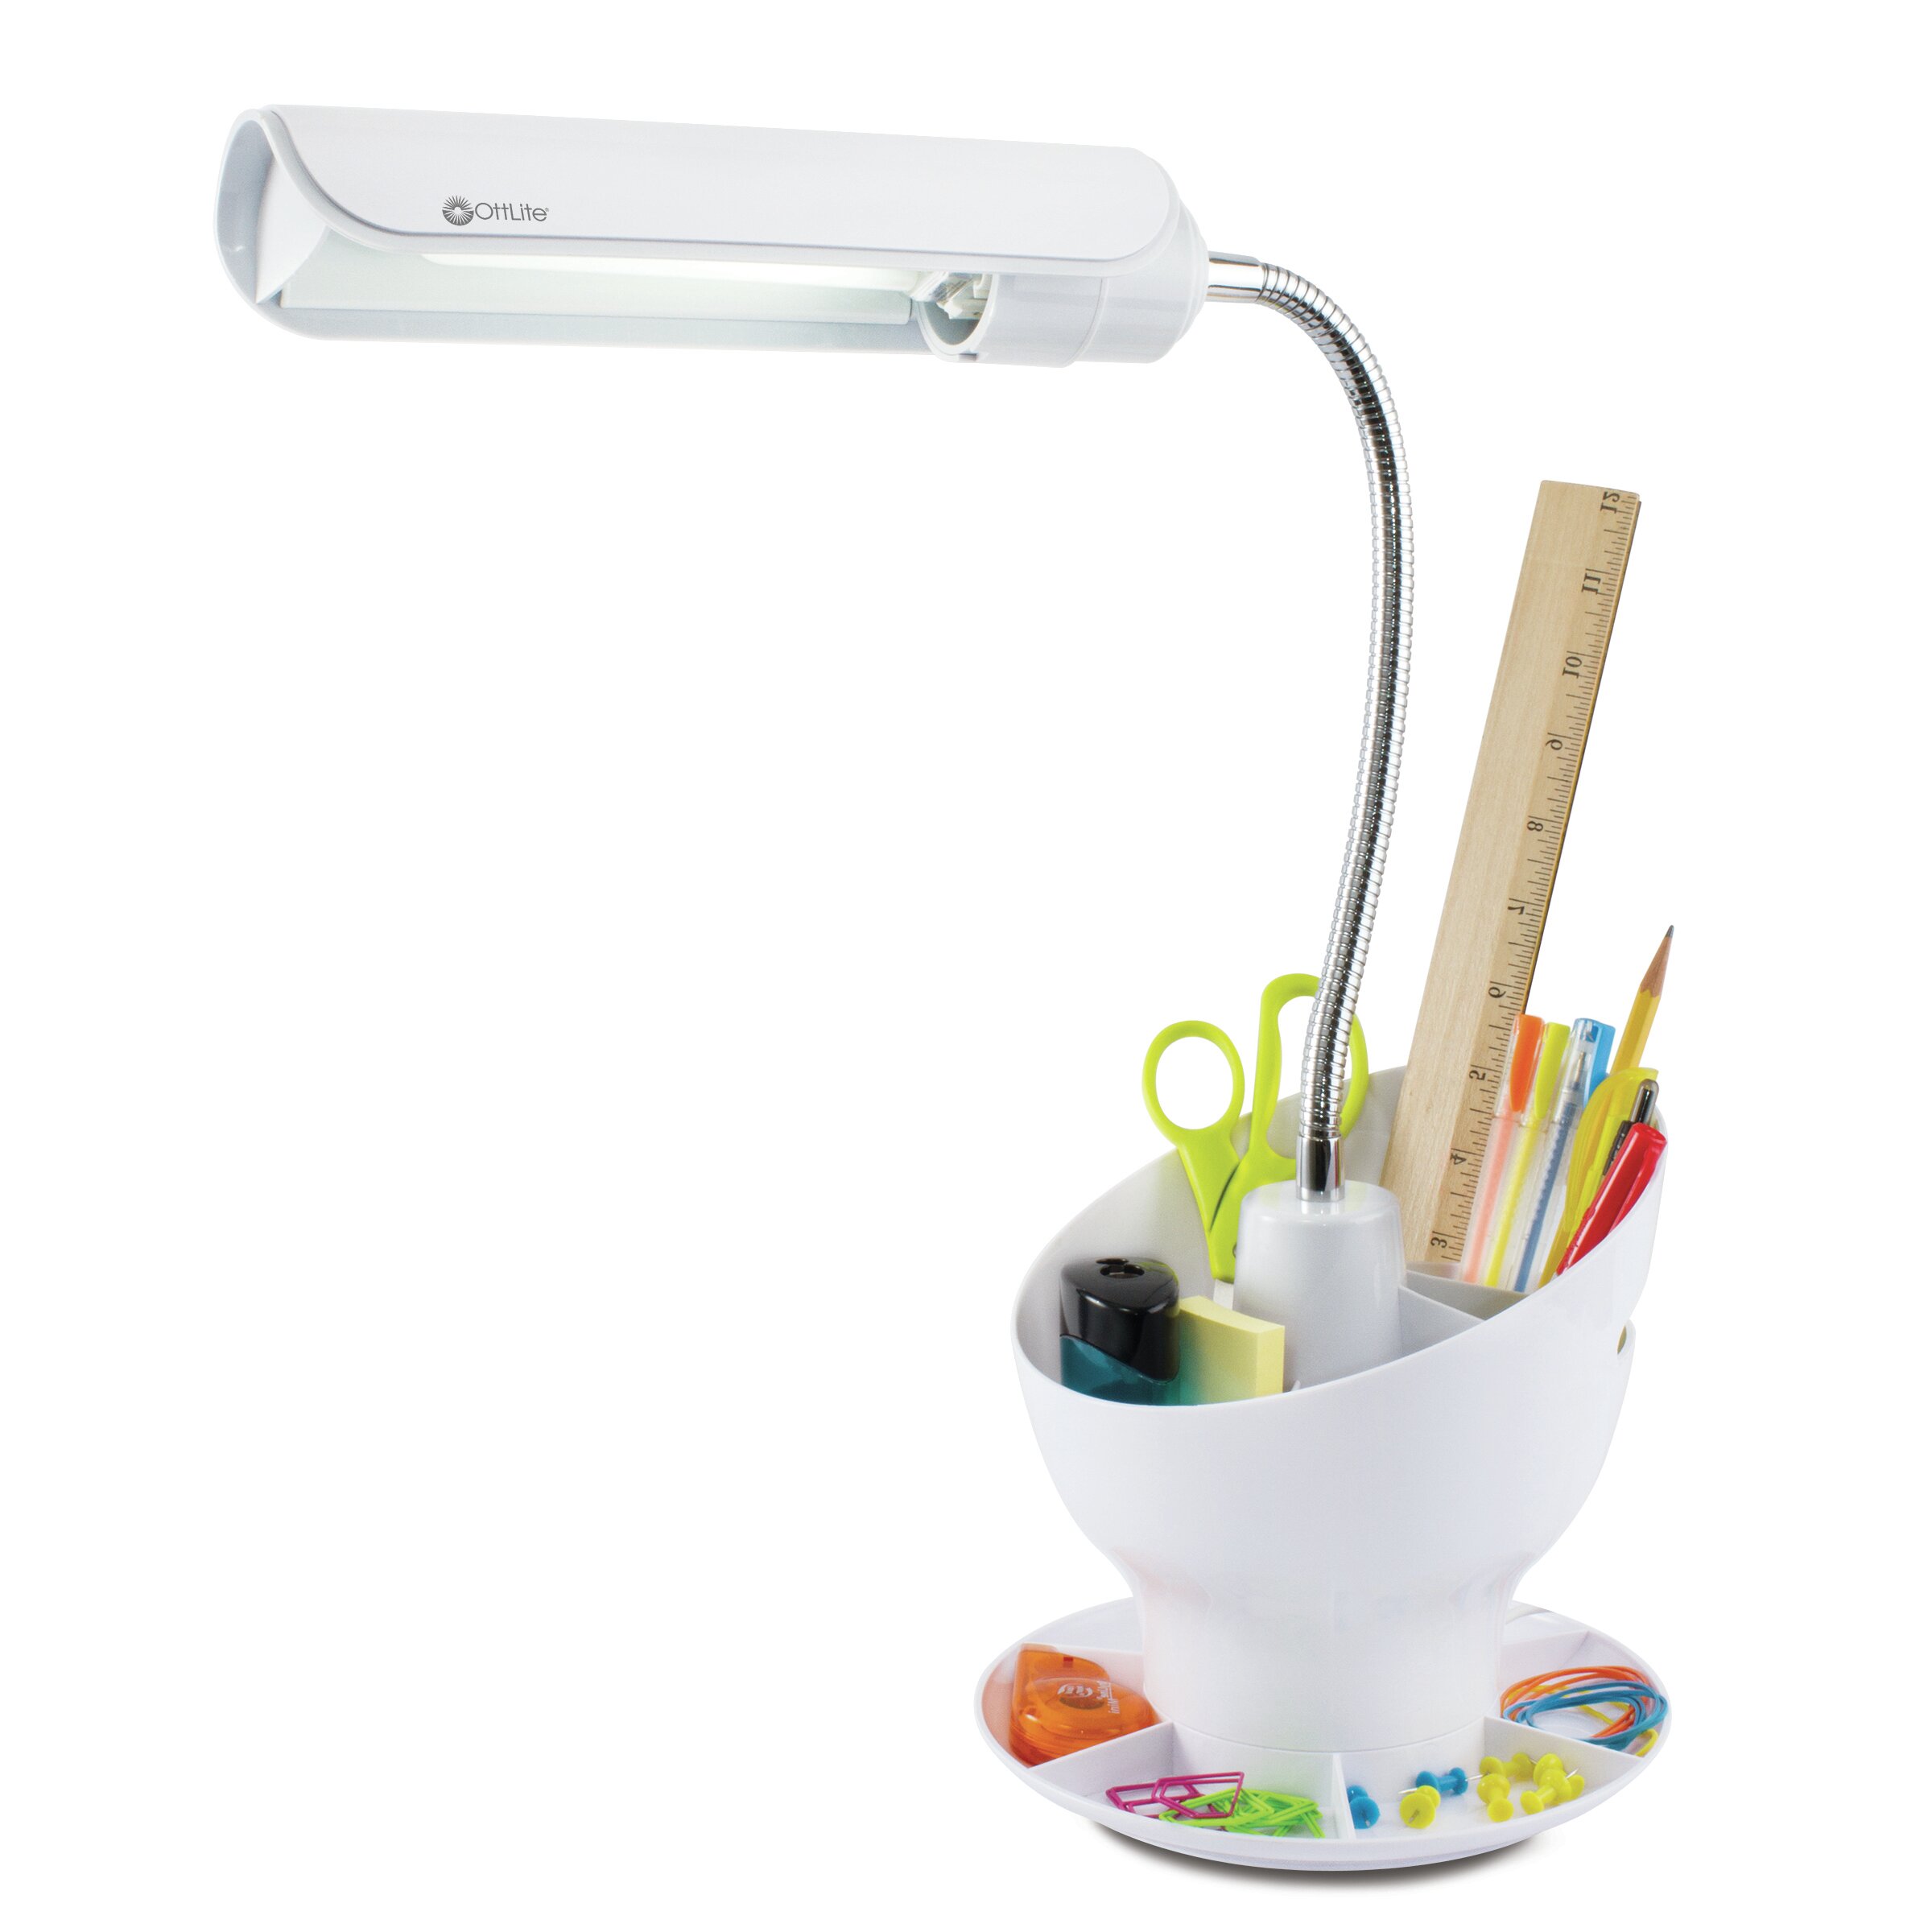 OTTLITE SEWING LAMP OR DESK LAMP WITH CRAFT ORGANIZER SPACE - PRISTINE